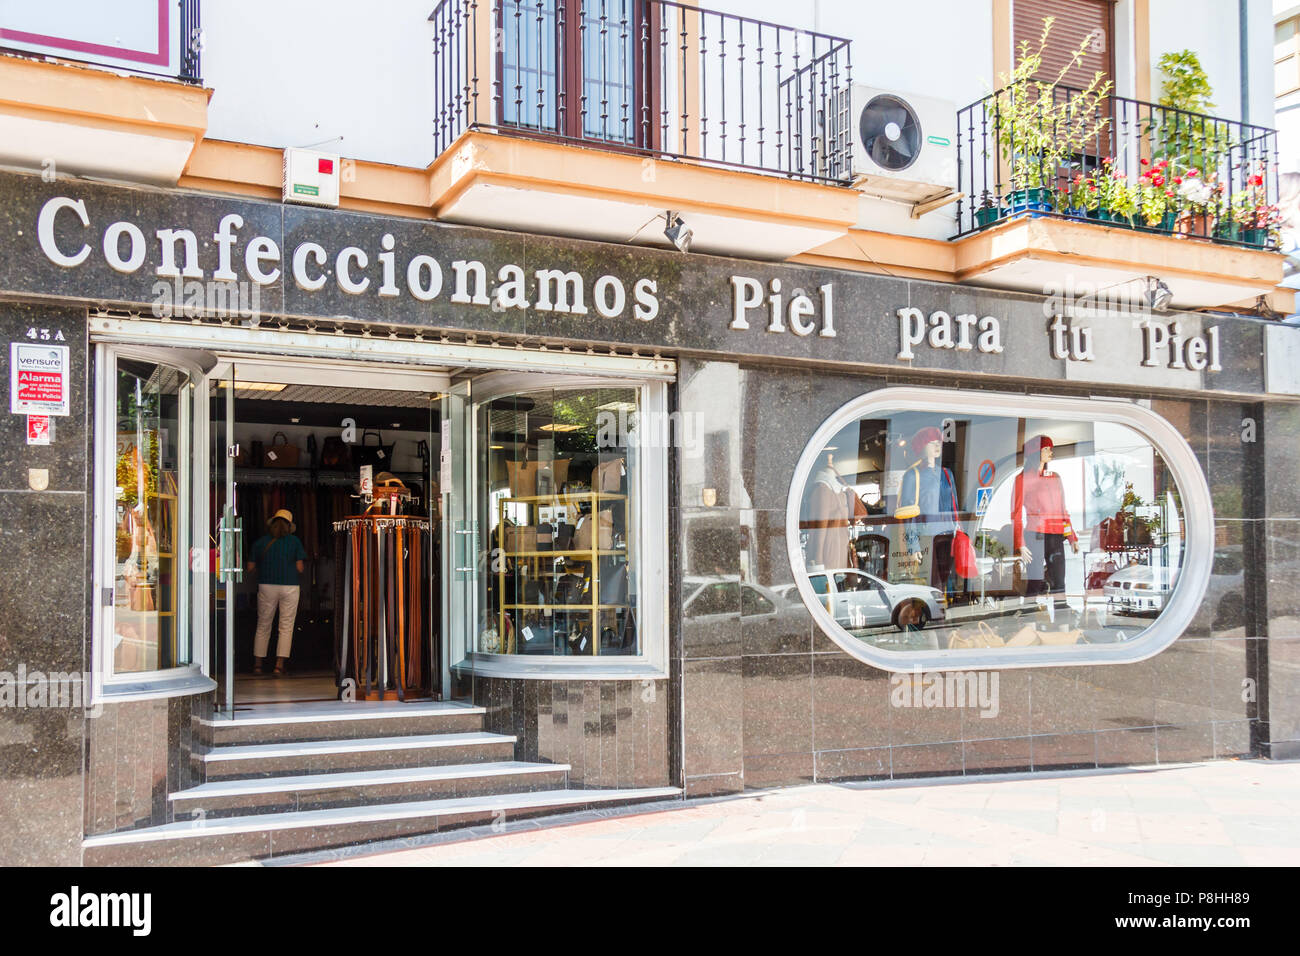 Ubreke, Spain - 22nd June 2018: A leather shop on the main street. the town has a thriving leather industry Stock Photo